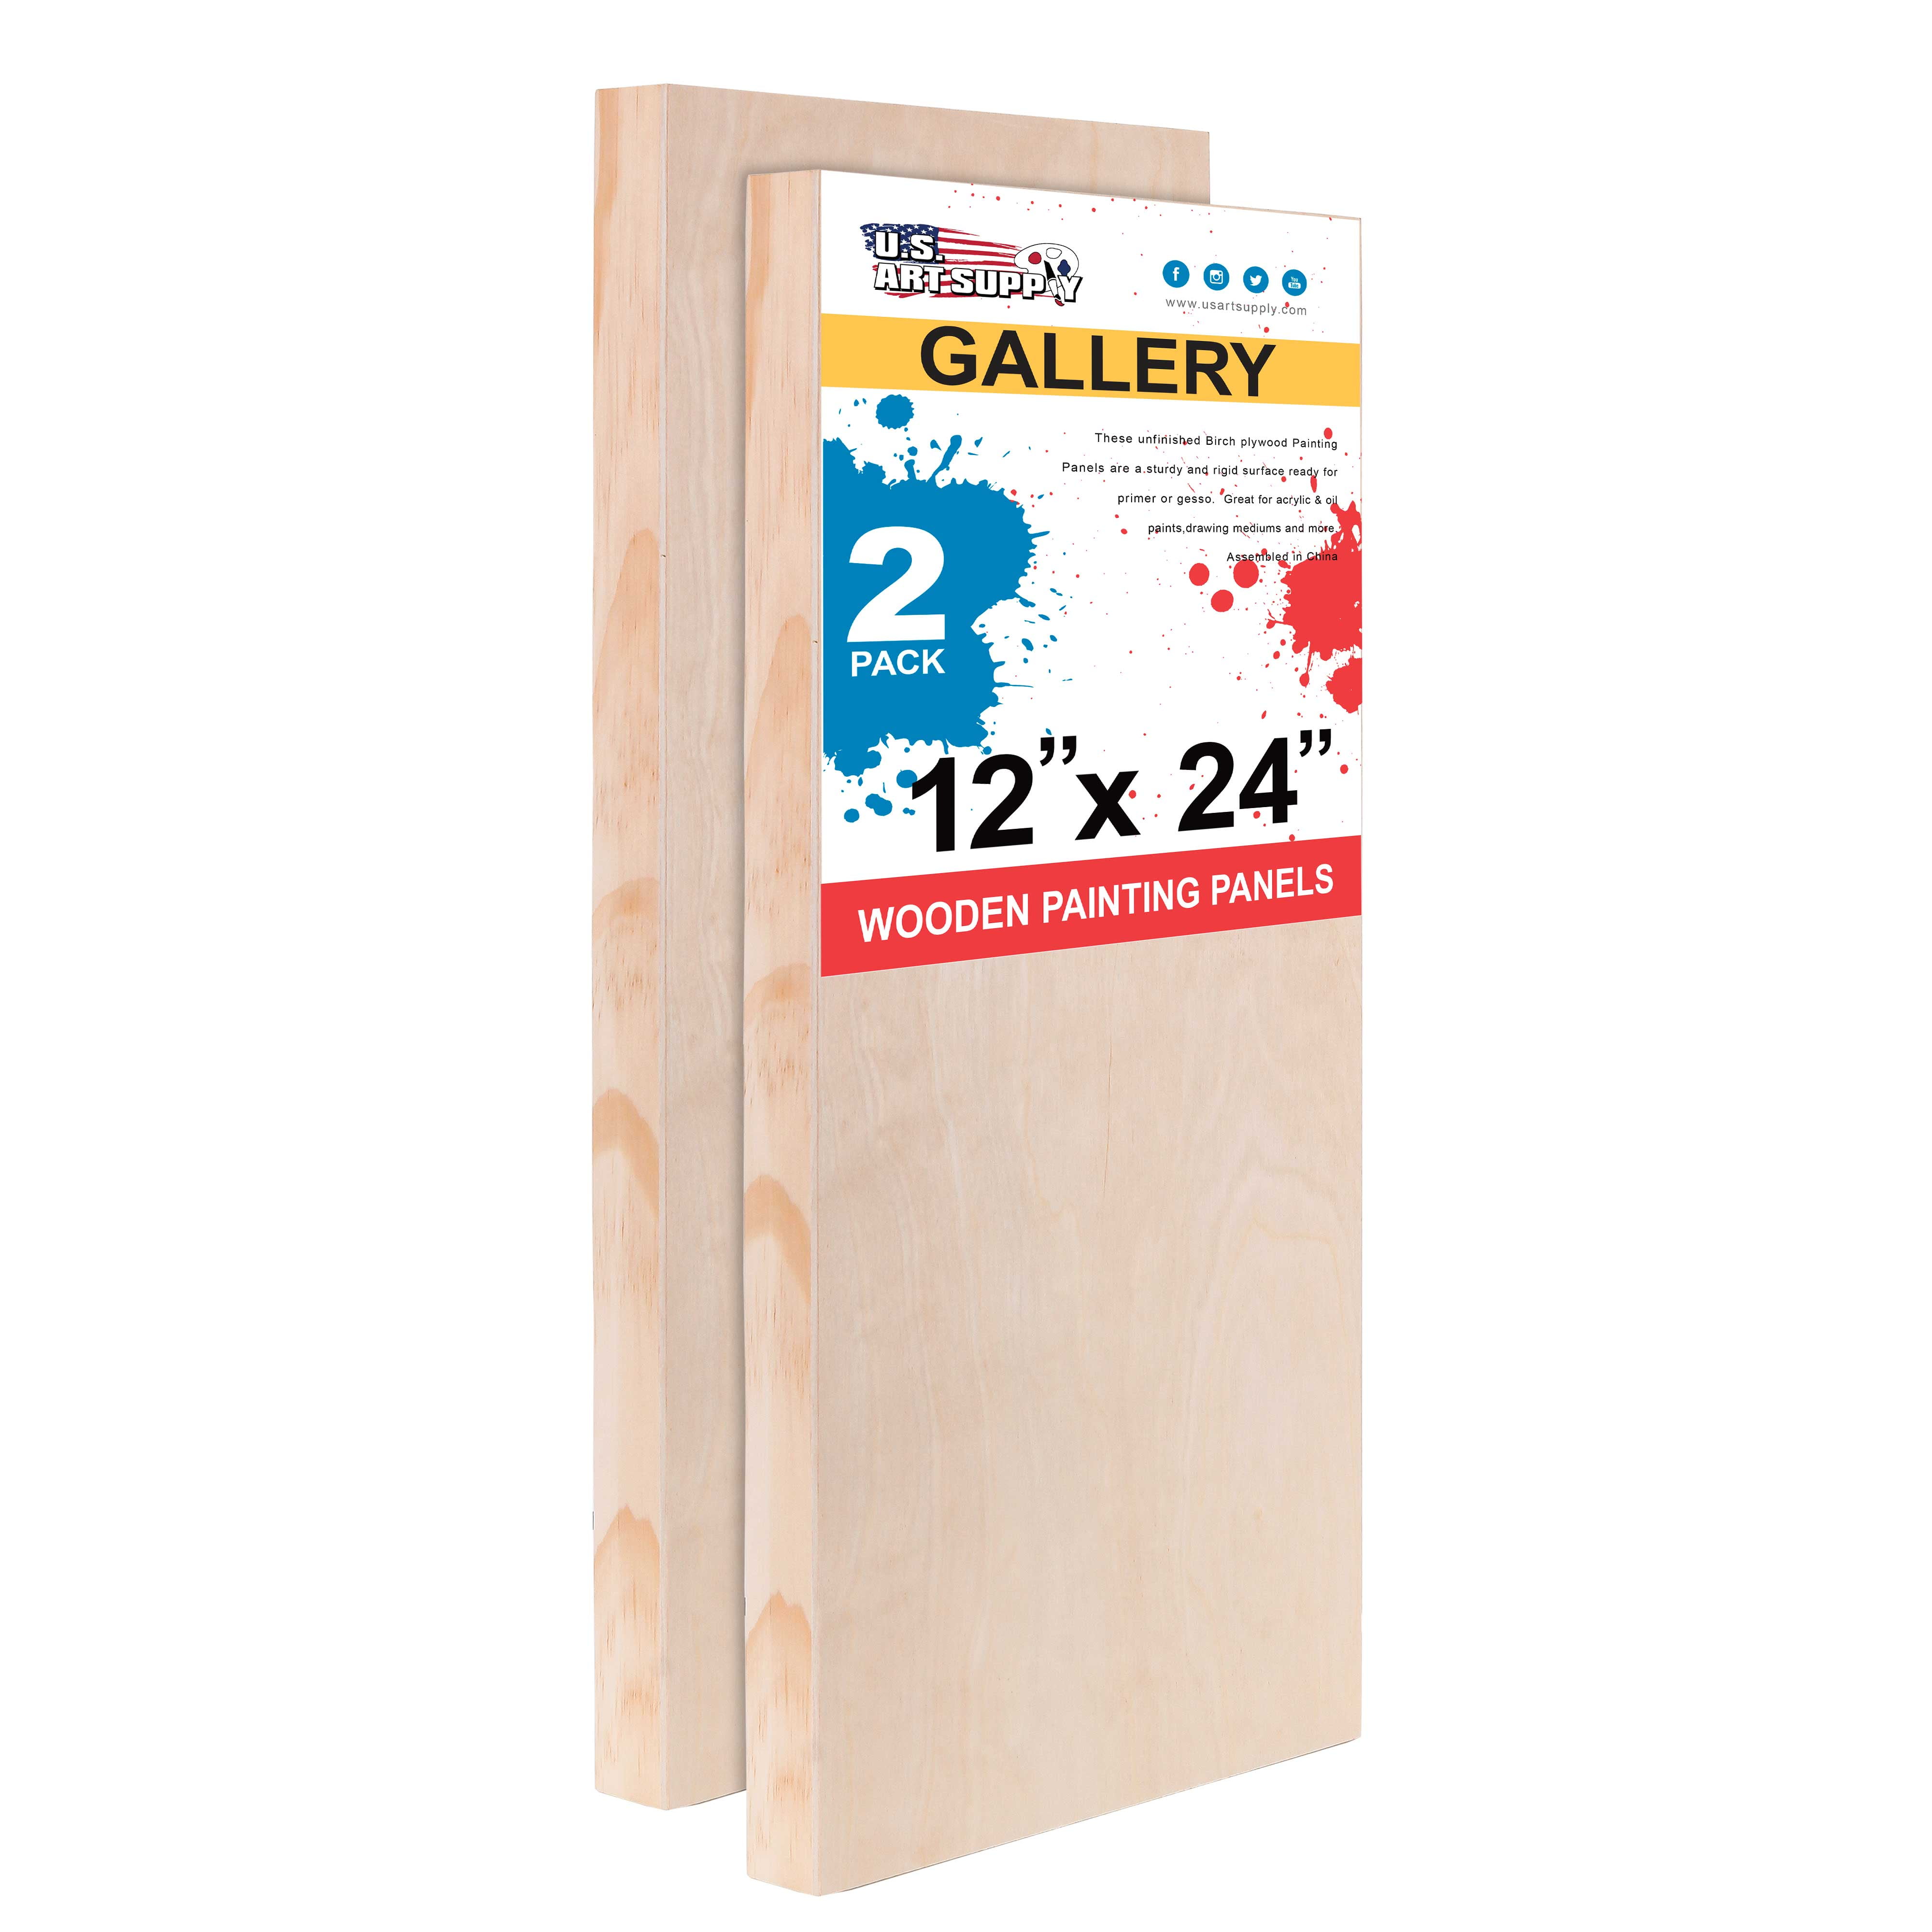 0.2 Deep Cradle Square Wood Canvas Boards for Painting Art & Craft Wood Painting Boards Dedoot 4.7x4.7 Unfinished Birch Wood Paint Pouring Panel Boards 